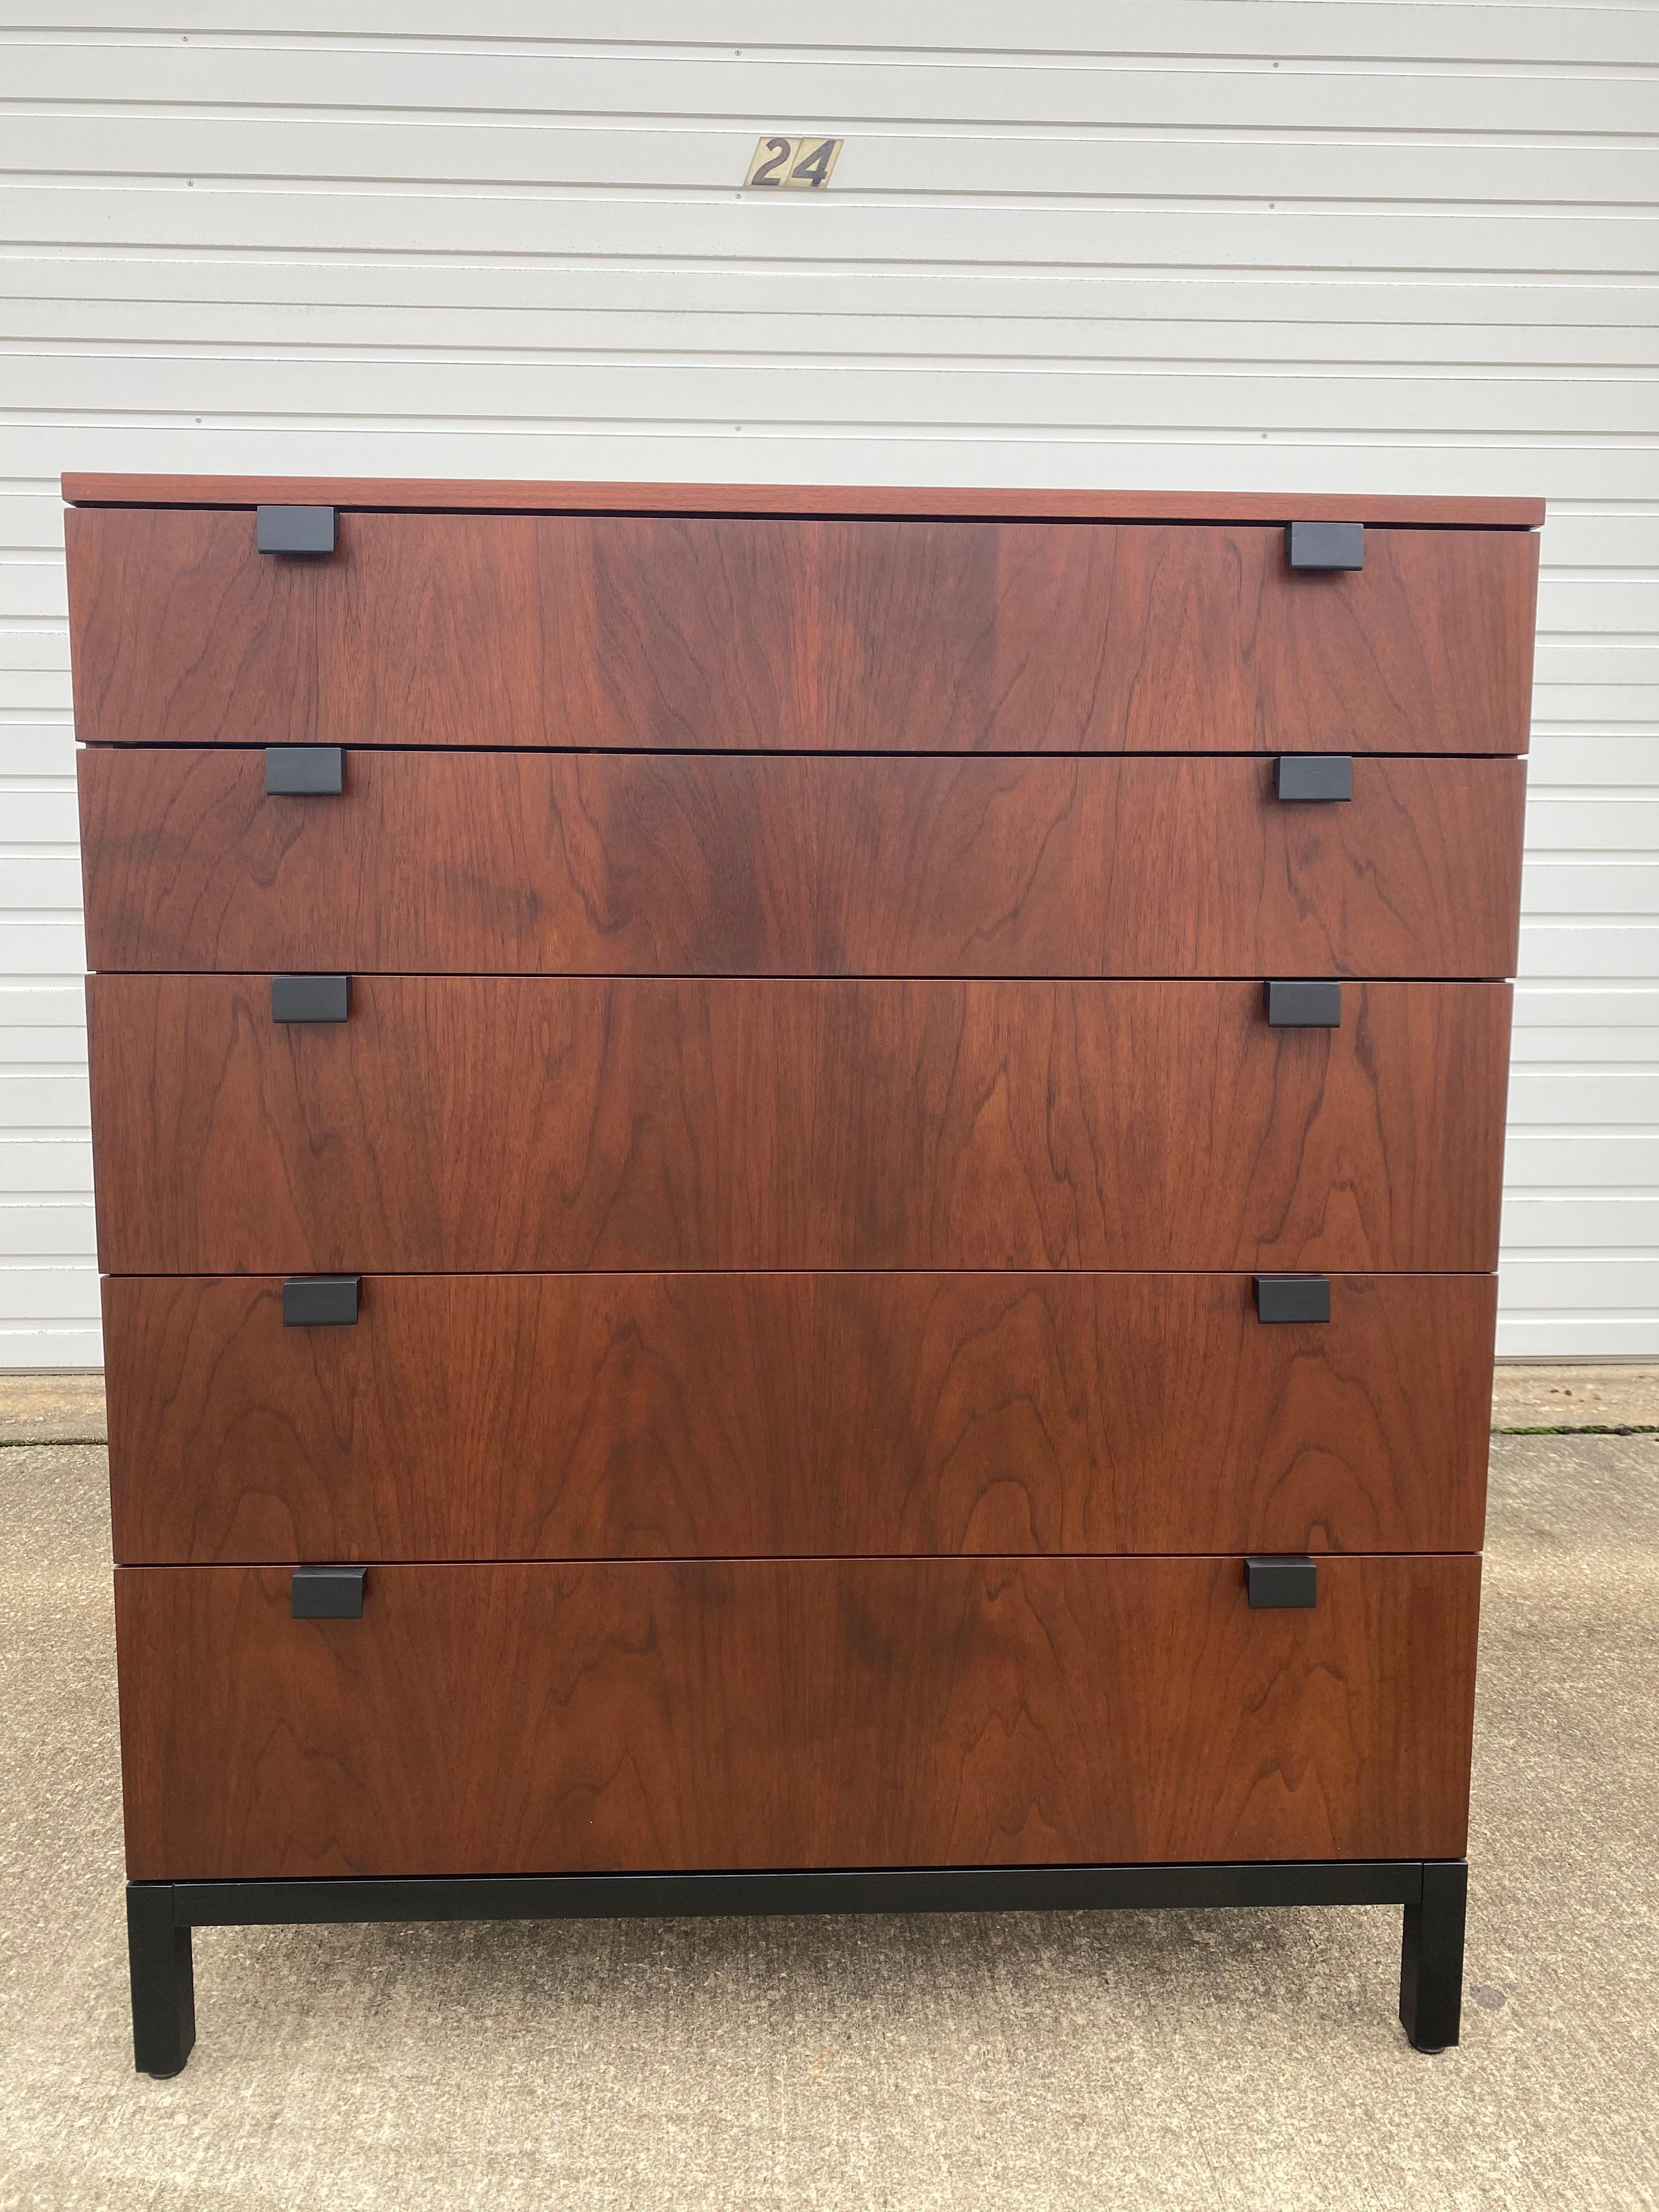 A Modern tallboy dresser designed by Milo Baughman for Directional from the Gallery I Collection, circa 1963 has been partially refinished to show off its beautiful walnut wood and new black lacquer on its handles and legs. This tallboy dresser has